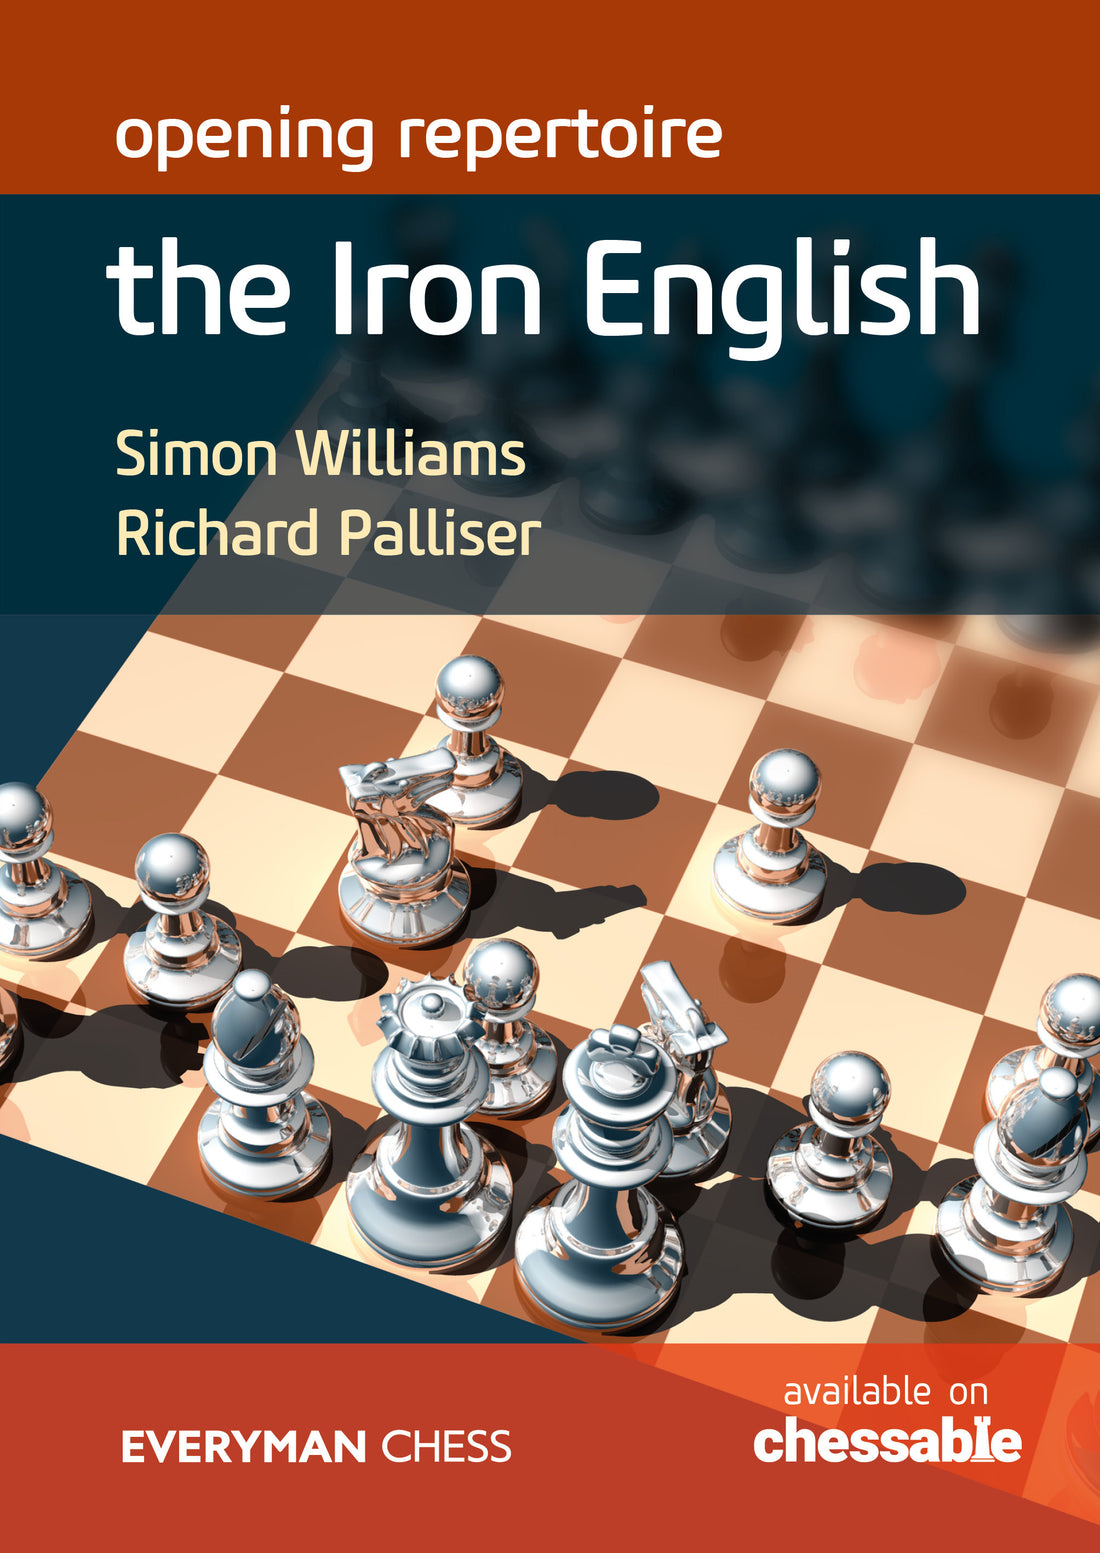 Opening Repertoire: The Iron English